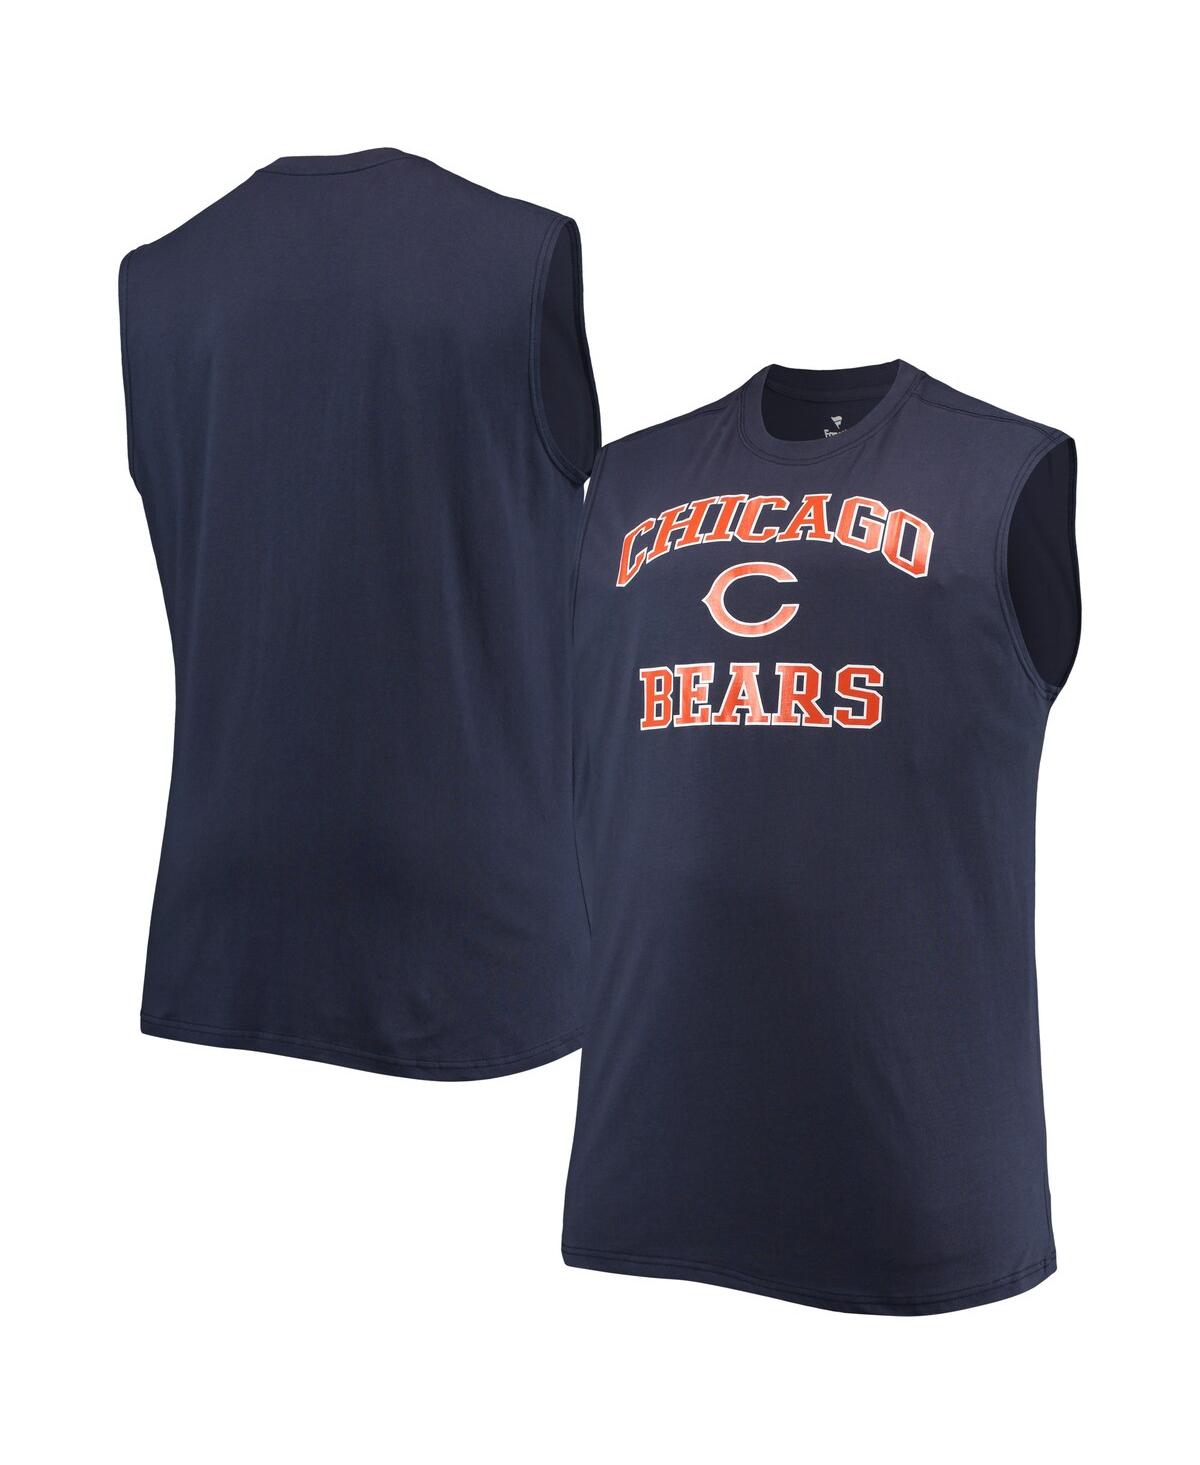 PROFILE MEN'S NAVY CHICAGO BEARS BIG AND TALL MUSCLE TANK TOP